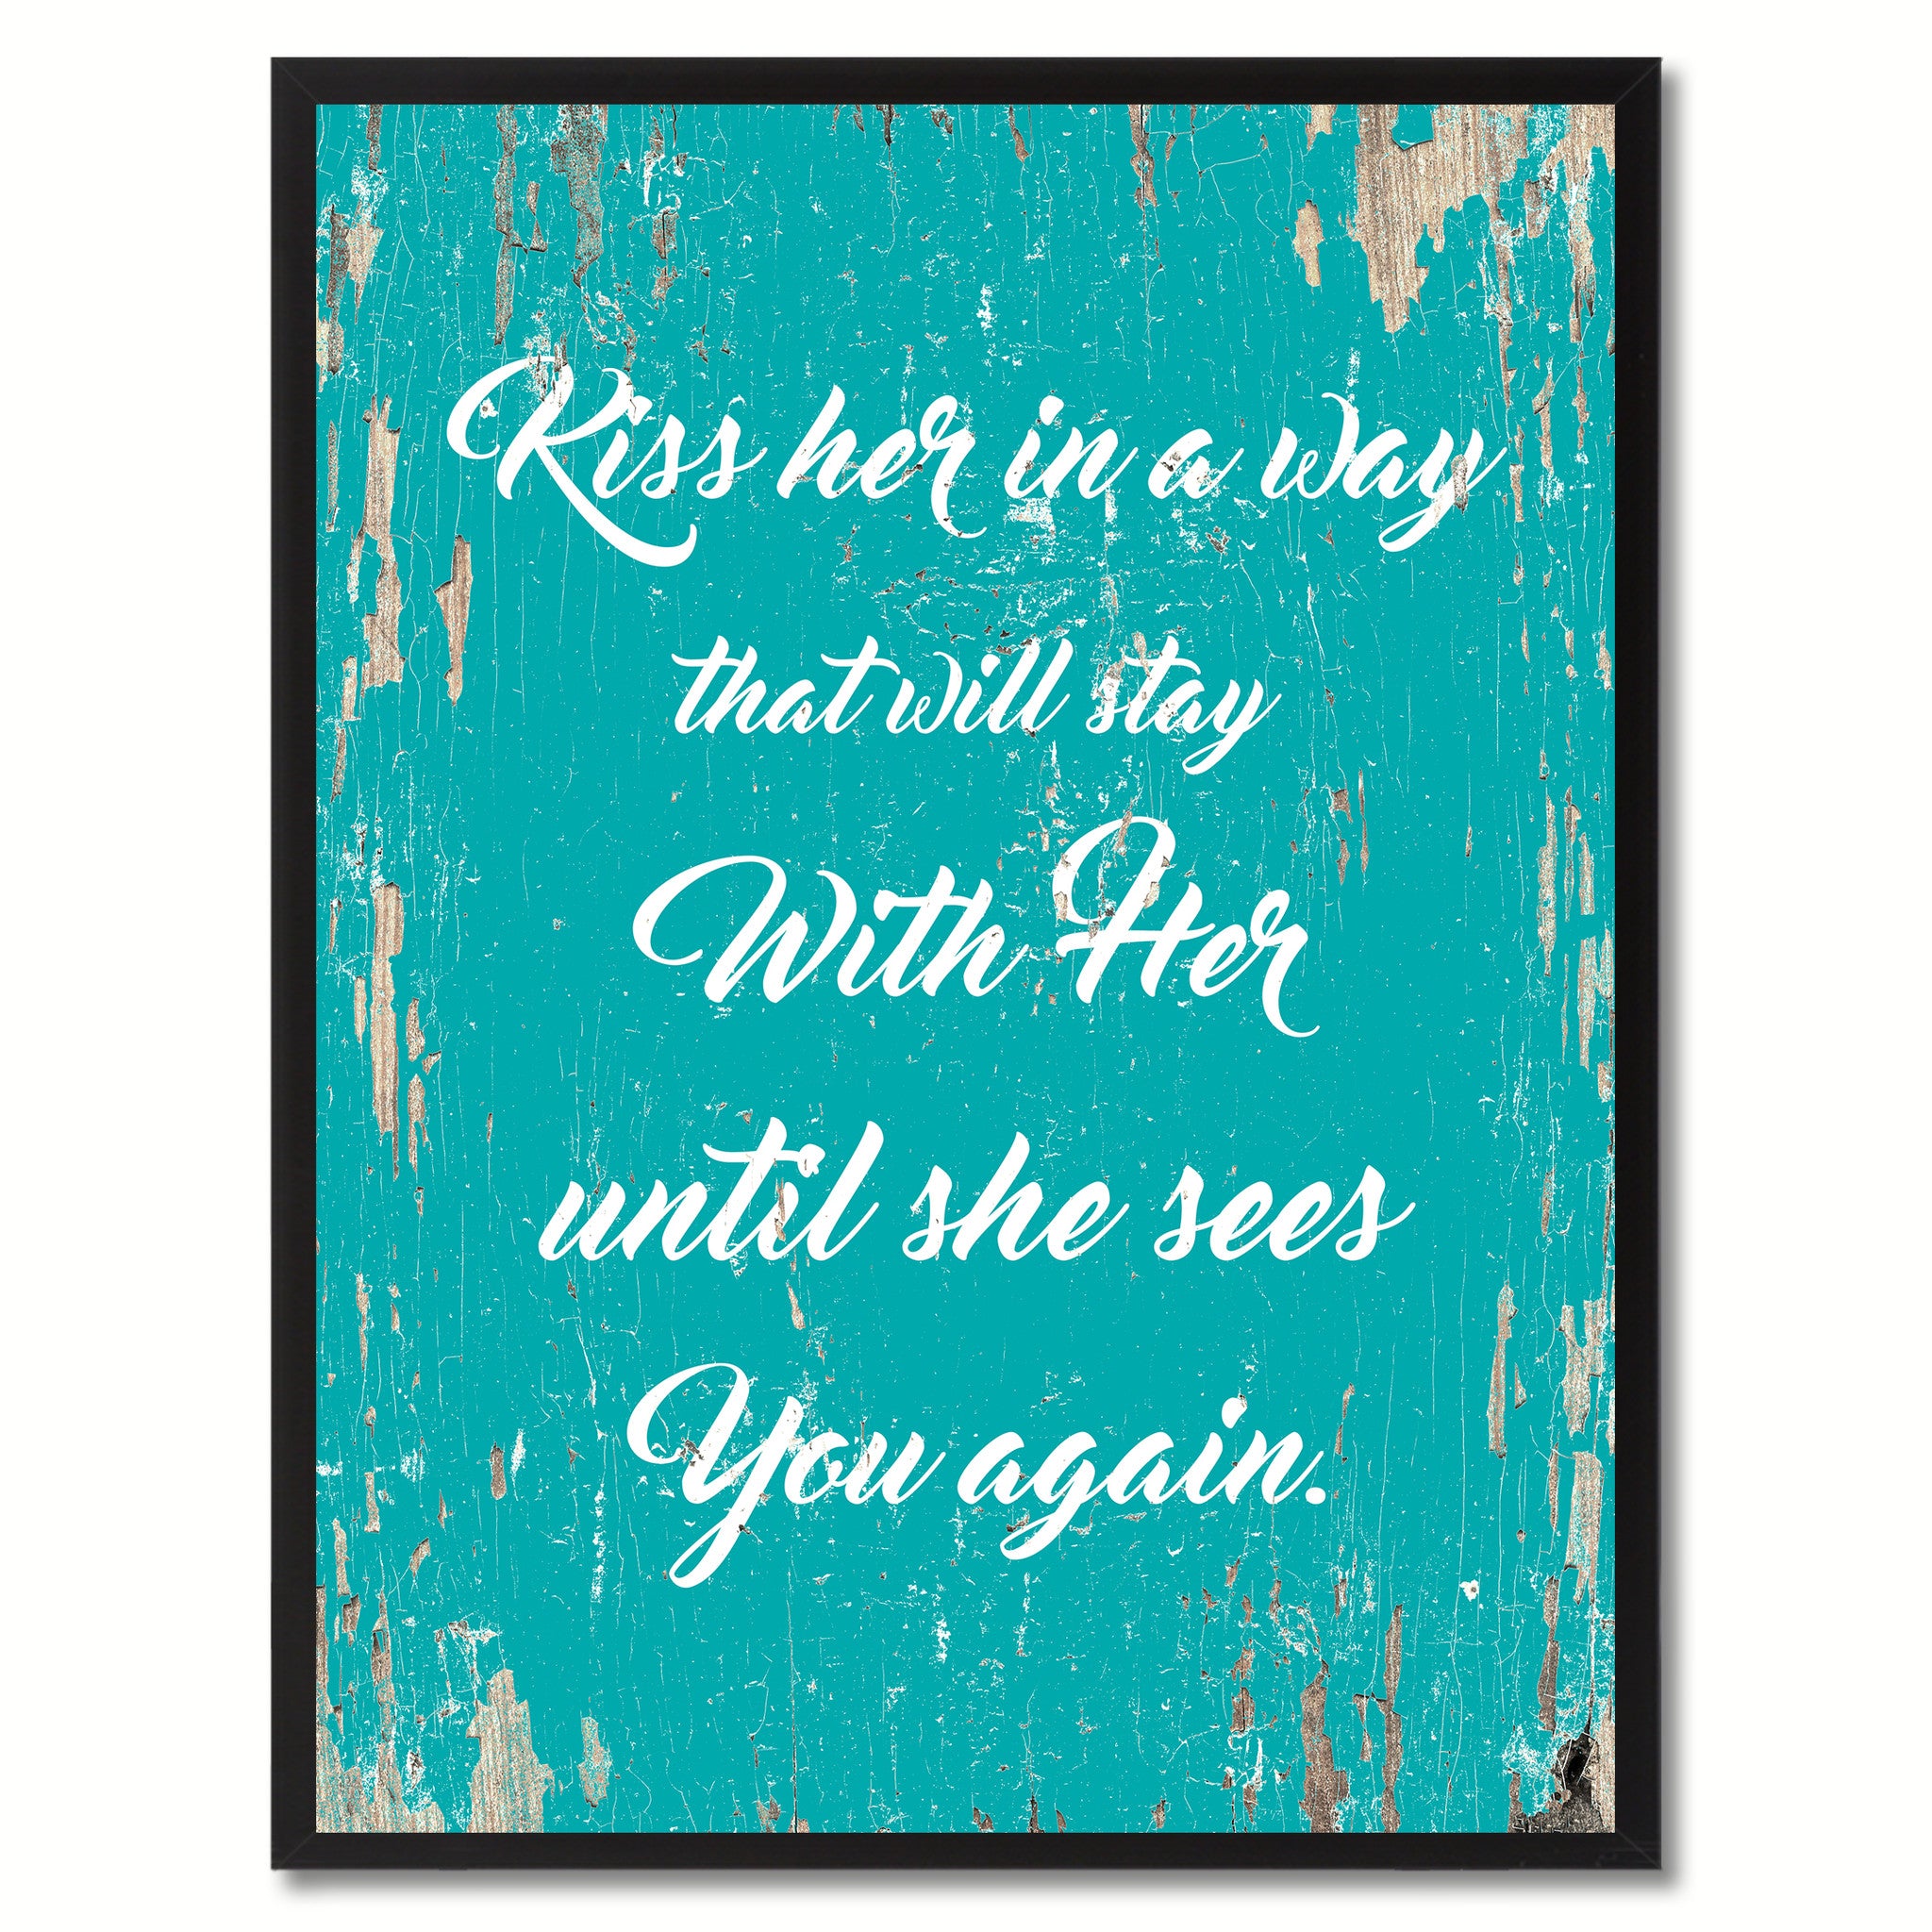 Kiss her in a way that will stay with her until she sees you again Happy Quote Saying Gift Ideas Home Decor Wall Art